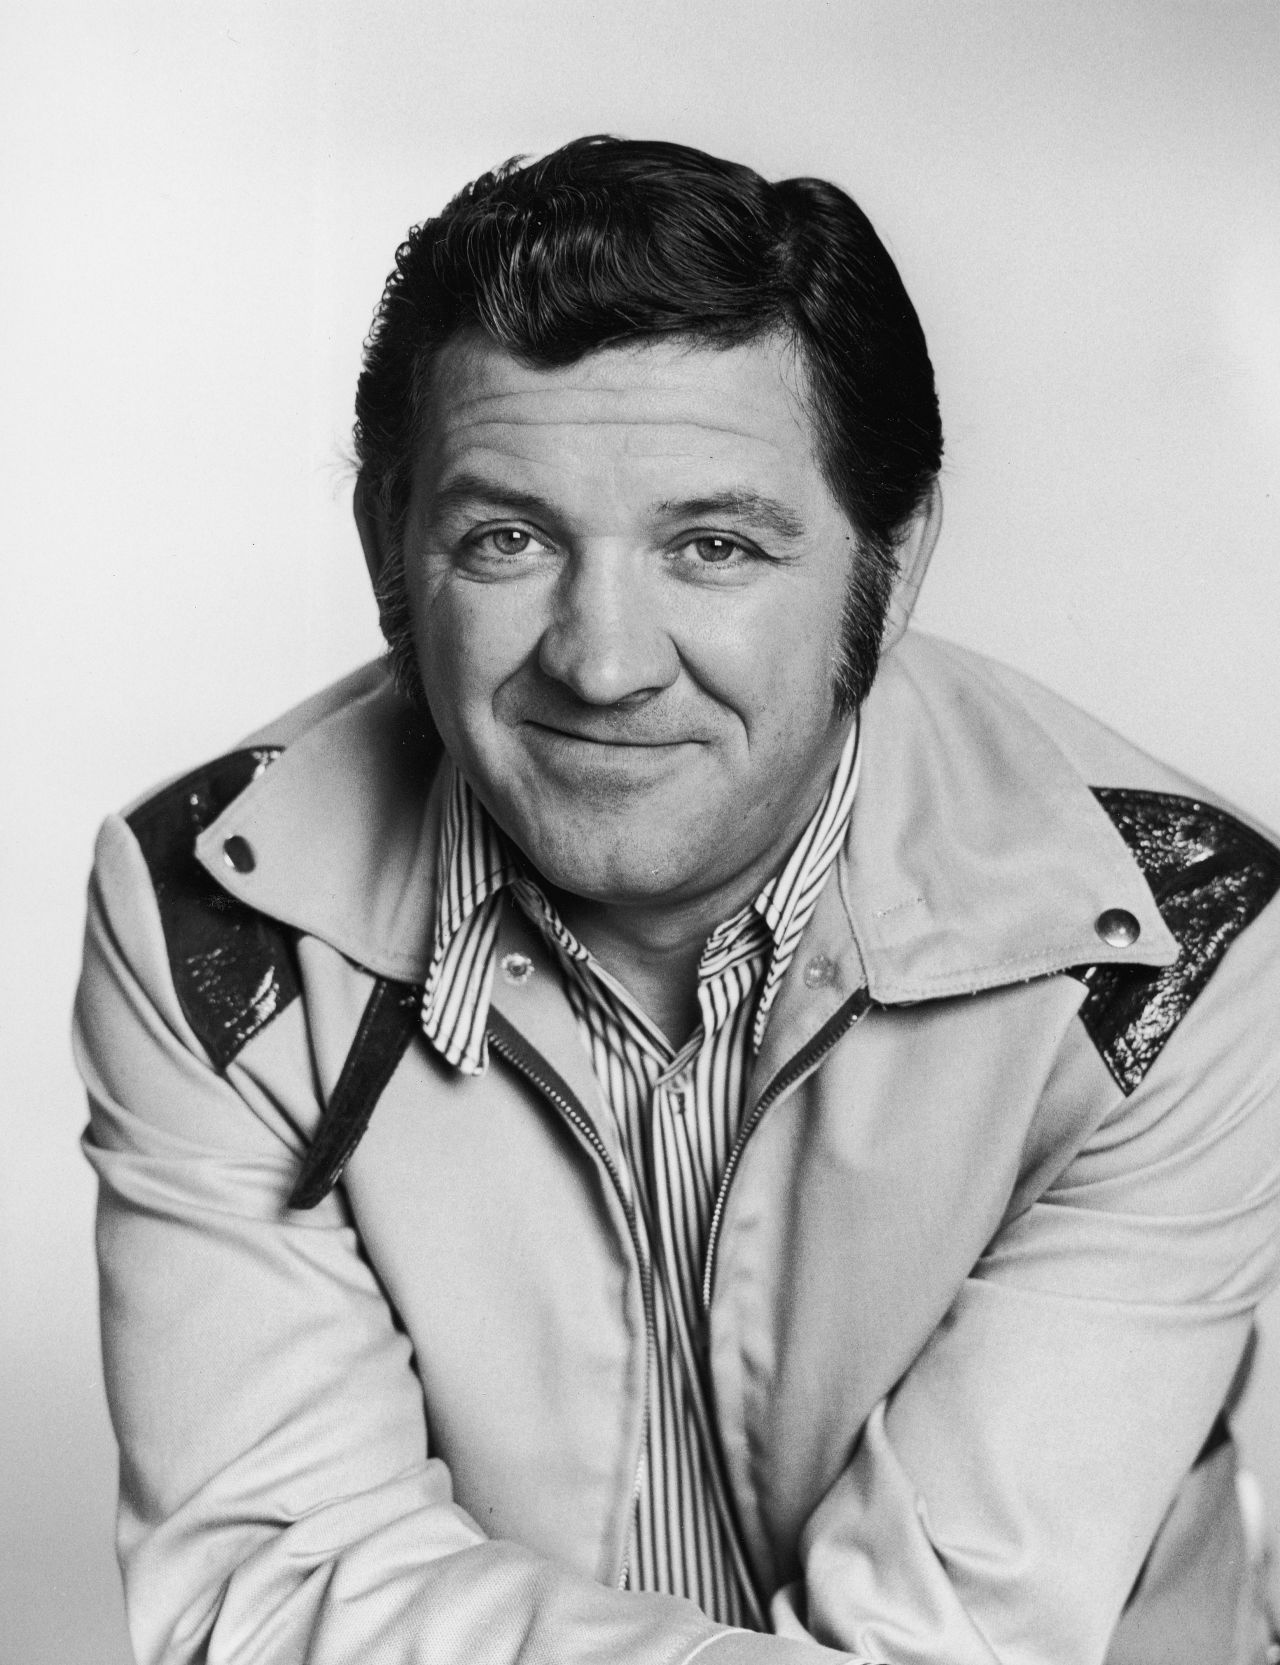 <a href="http://www.cnn.com/2012/05/06/showbiz/george-lindsey-obit/index.html">George Lindsey</a>, the actor who portrayed the country-bumpkin mechanic Goober Pyle on "The Andy Griffith Show," died May 6 after a brief illness, his family said. He was 83.